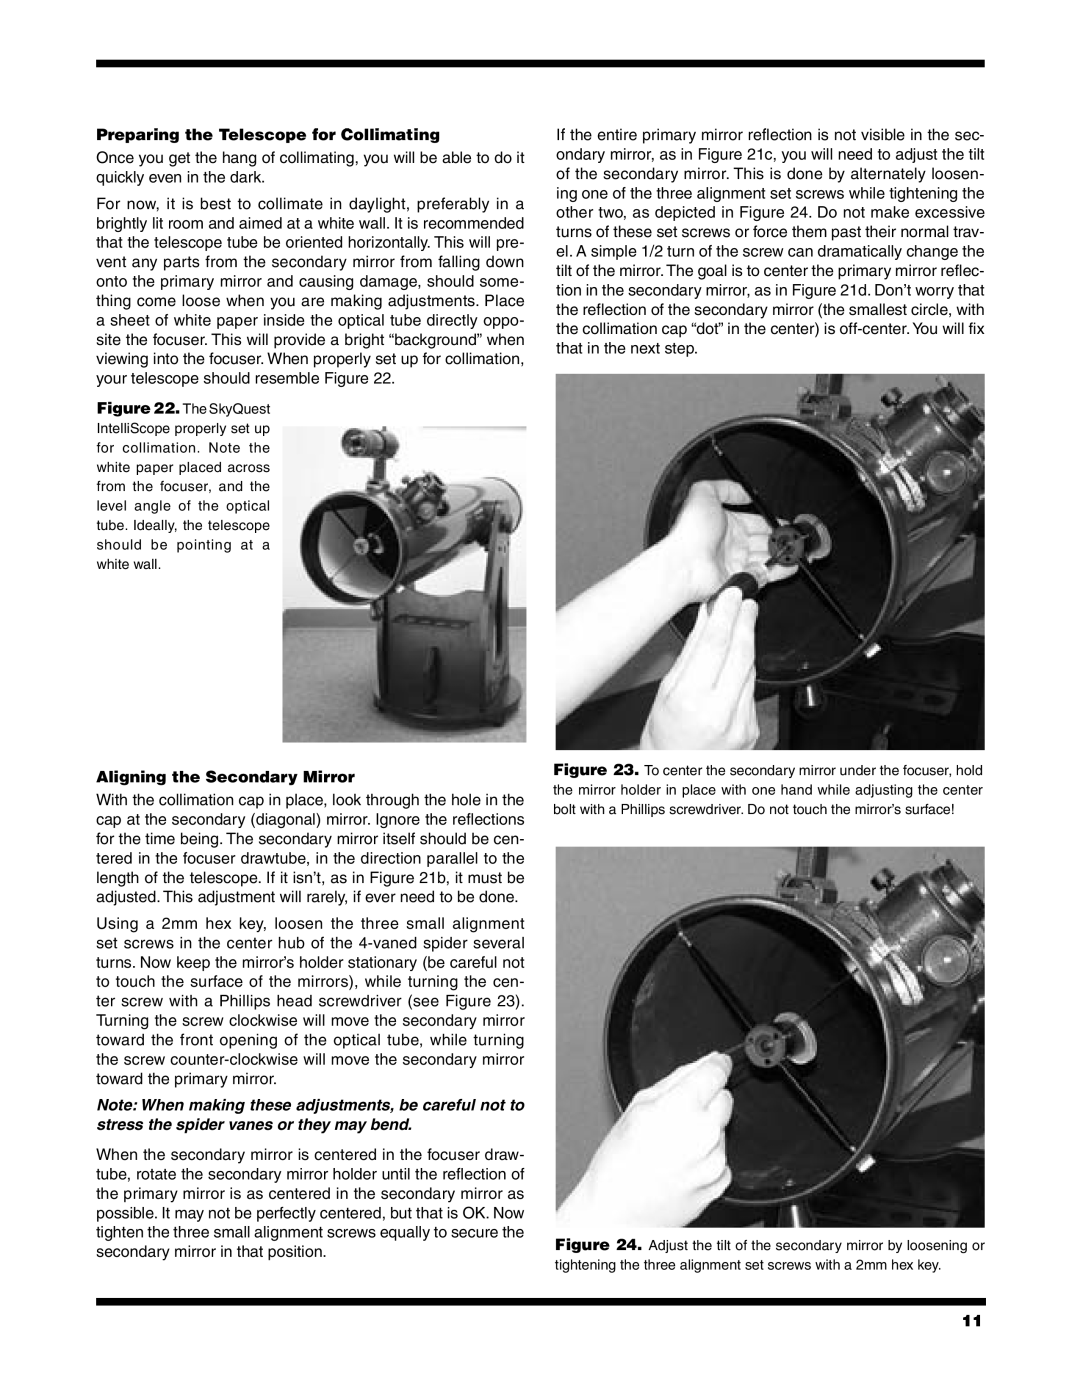 Orion XT12 instruction manual Preparing the Telescope for Collimating, Aligning the Secondary Mirror 